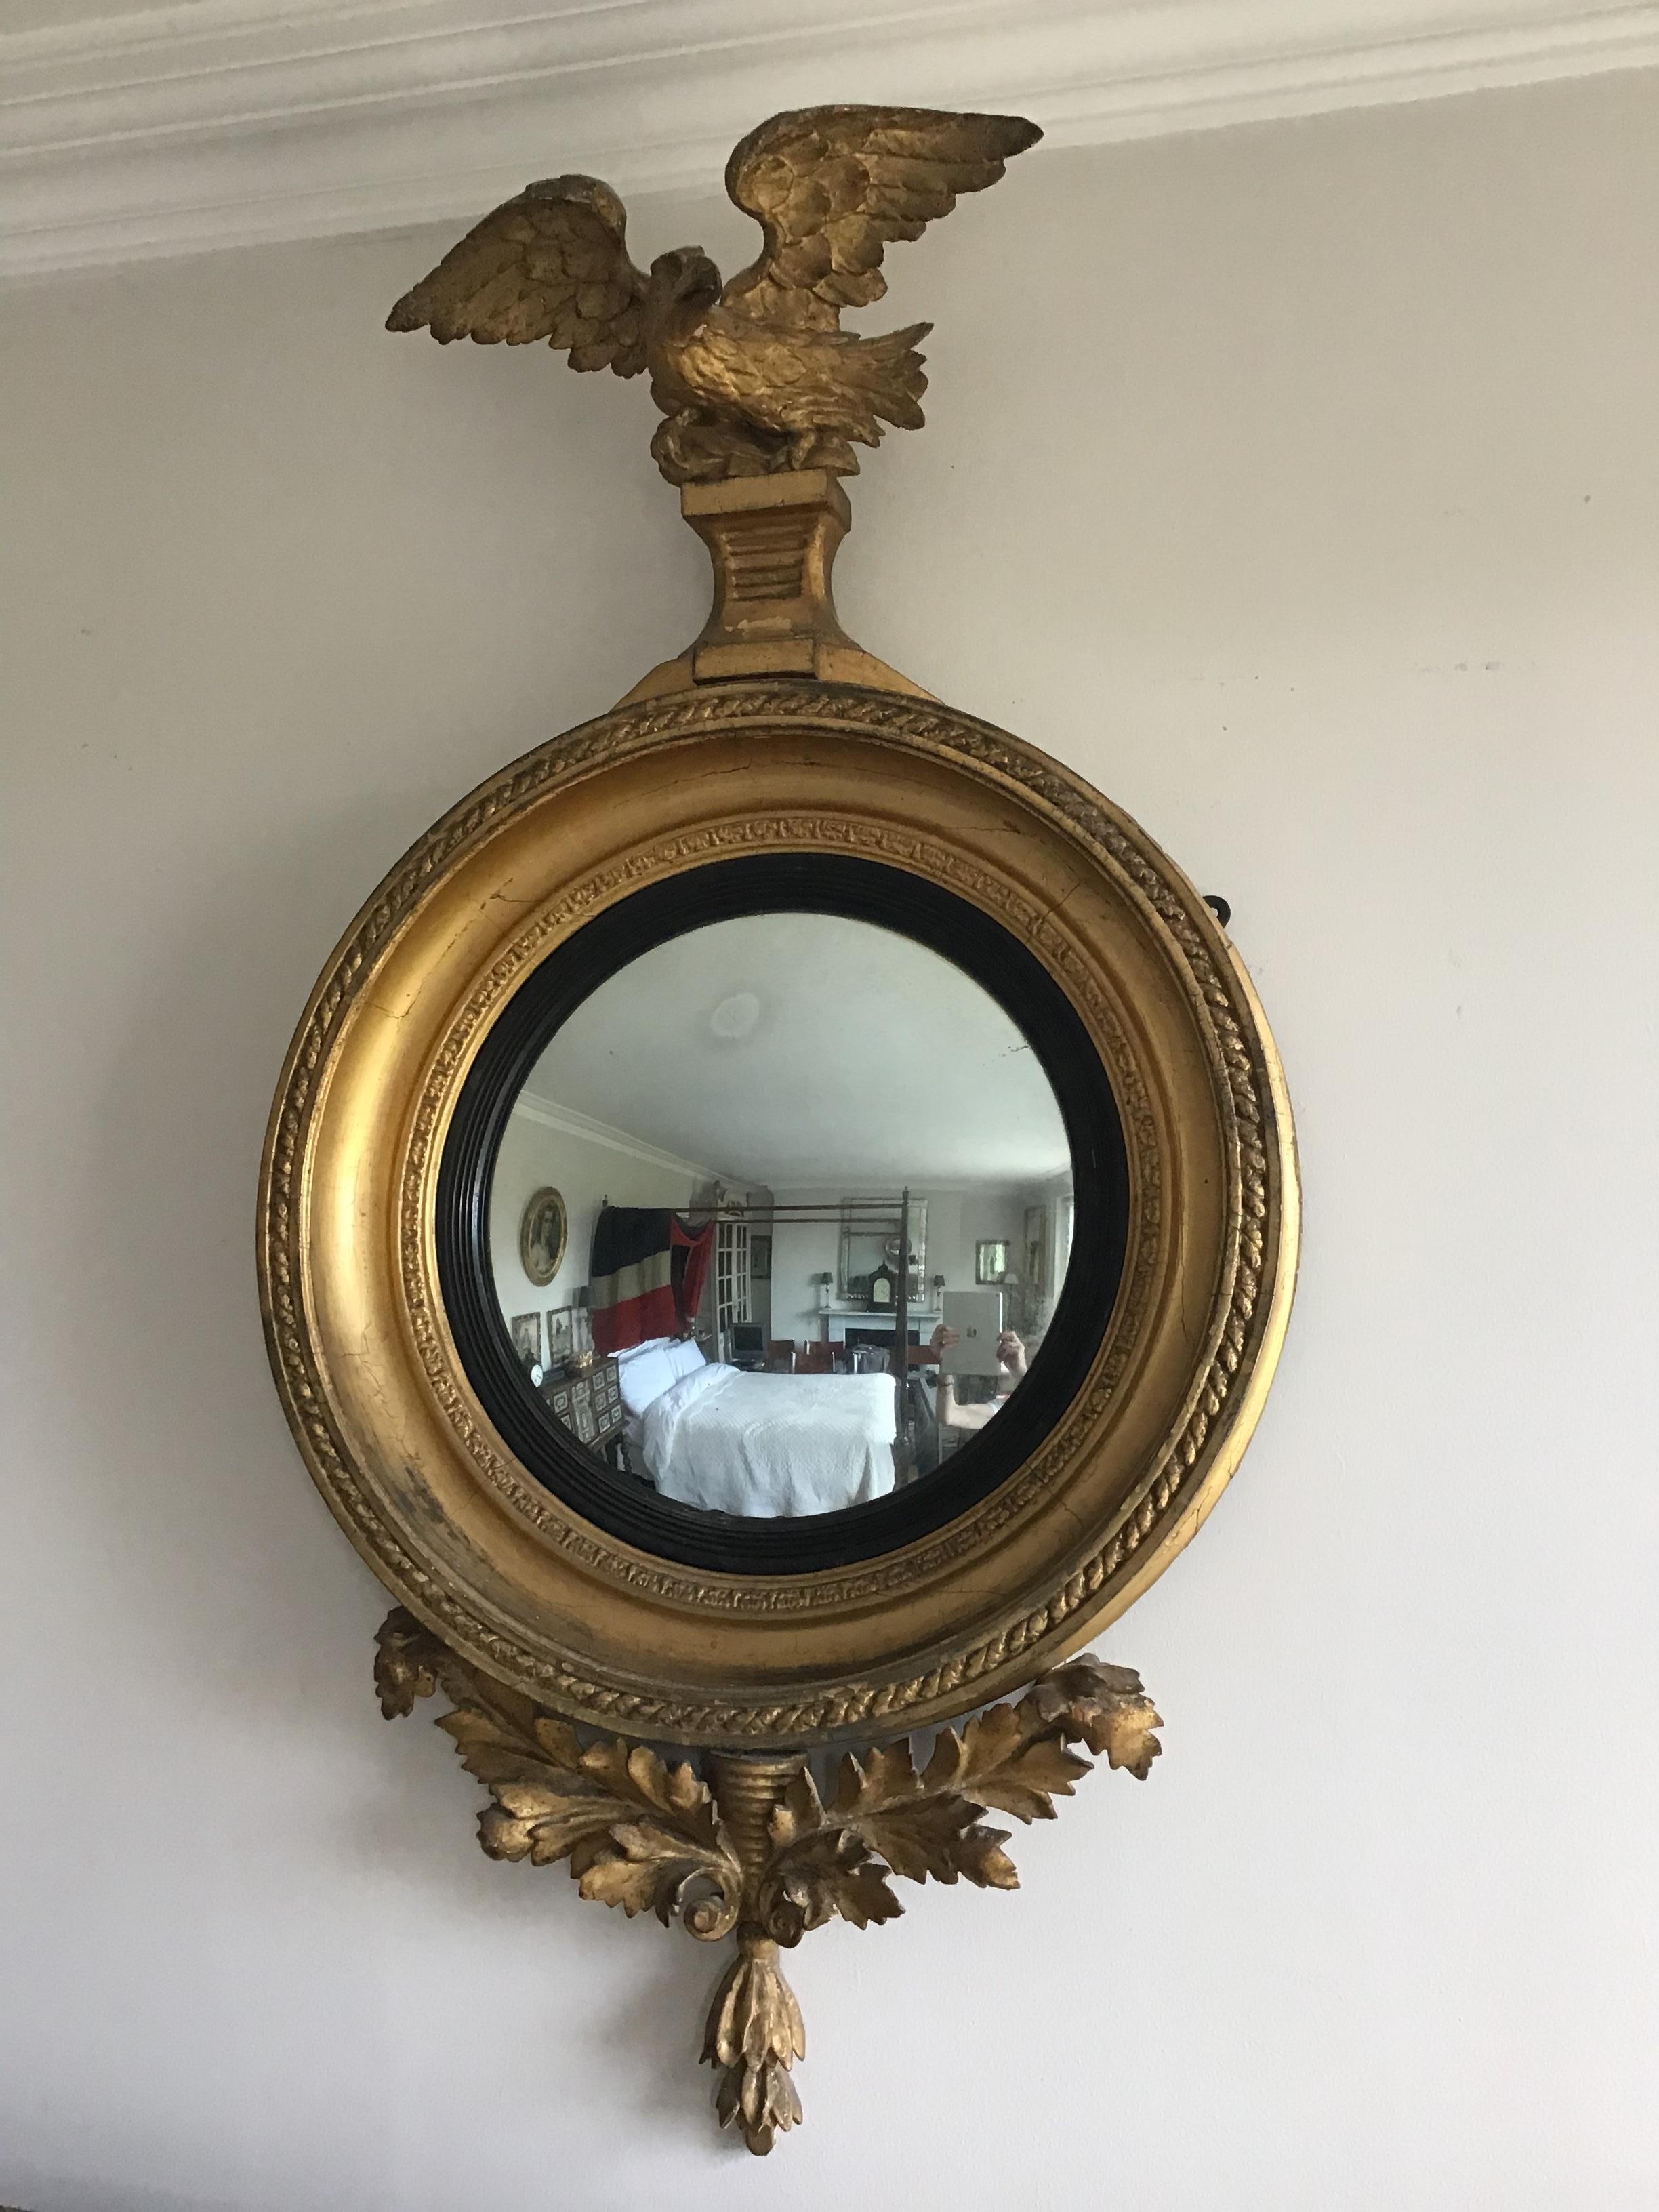 English Regency Period Giltwood Convex Wall Mirror with Eagle Crest For Sale 4